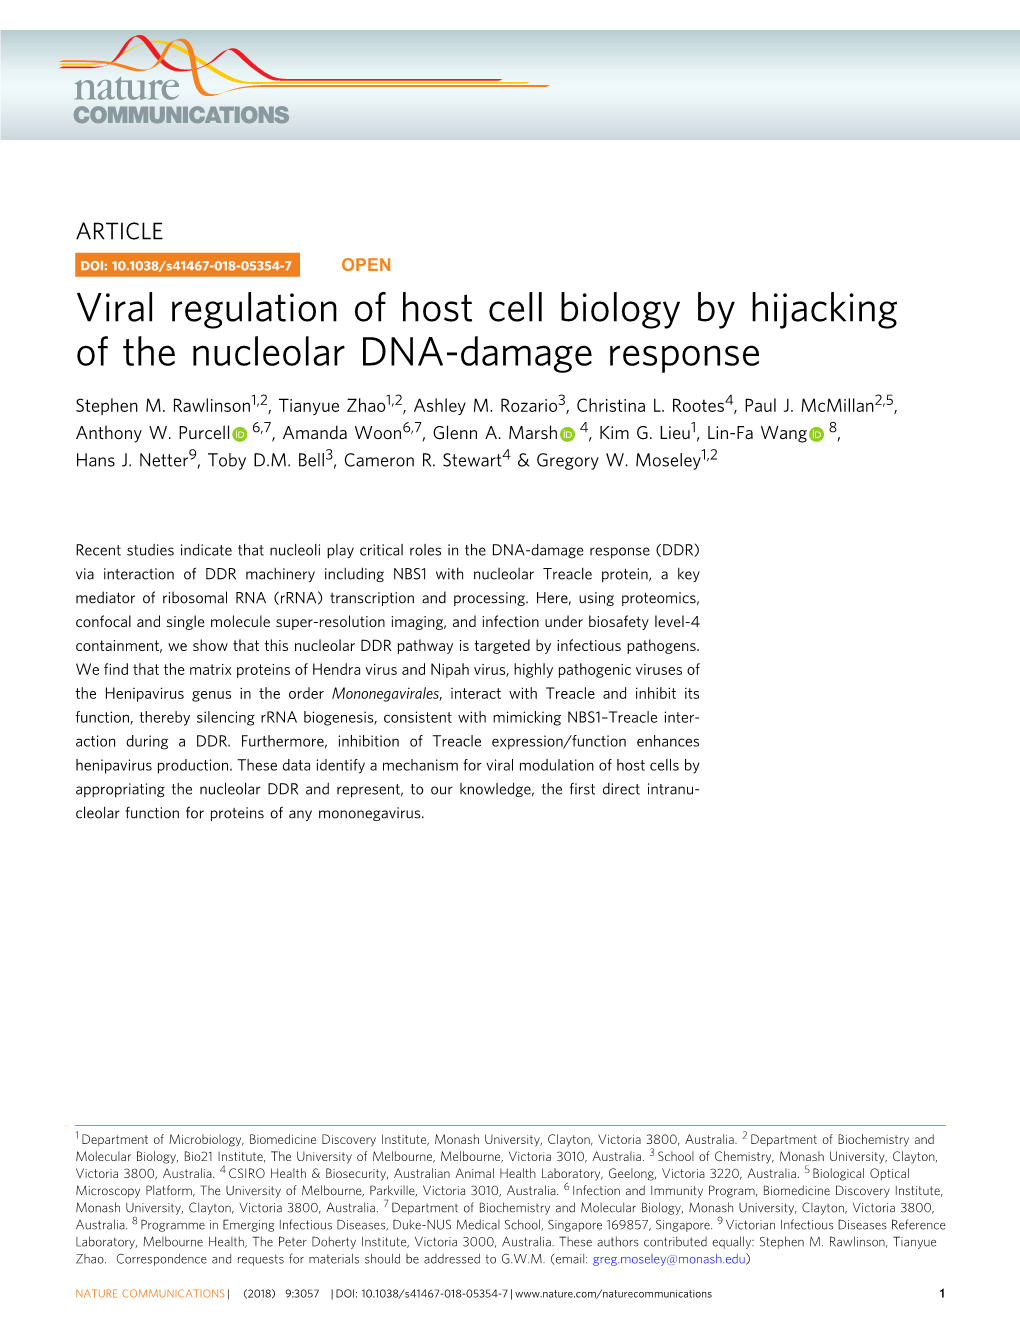 Viral Regulation of Host Cell Biology by Hijacking of the Nucleolar DNA-Damage Response